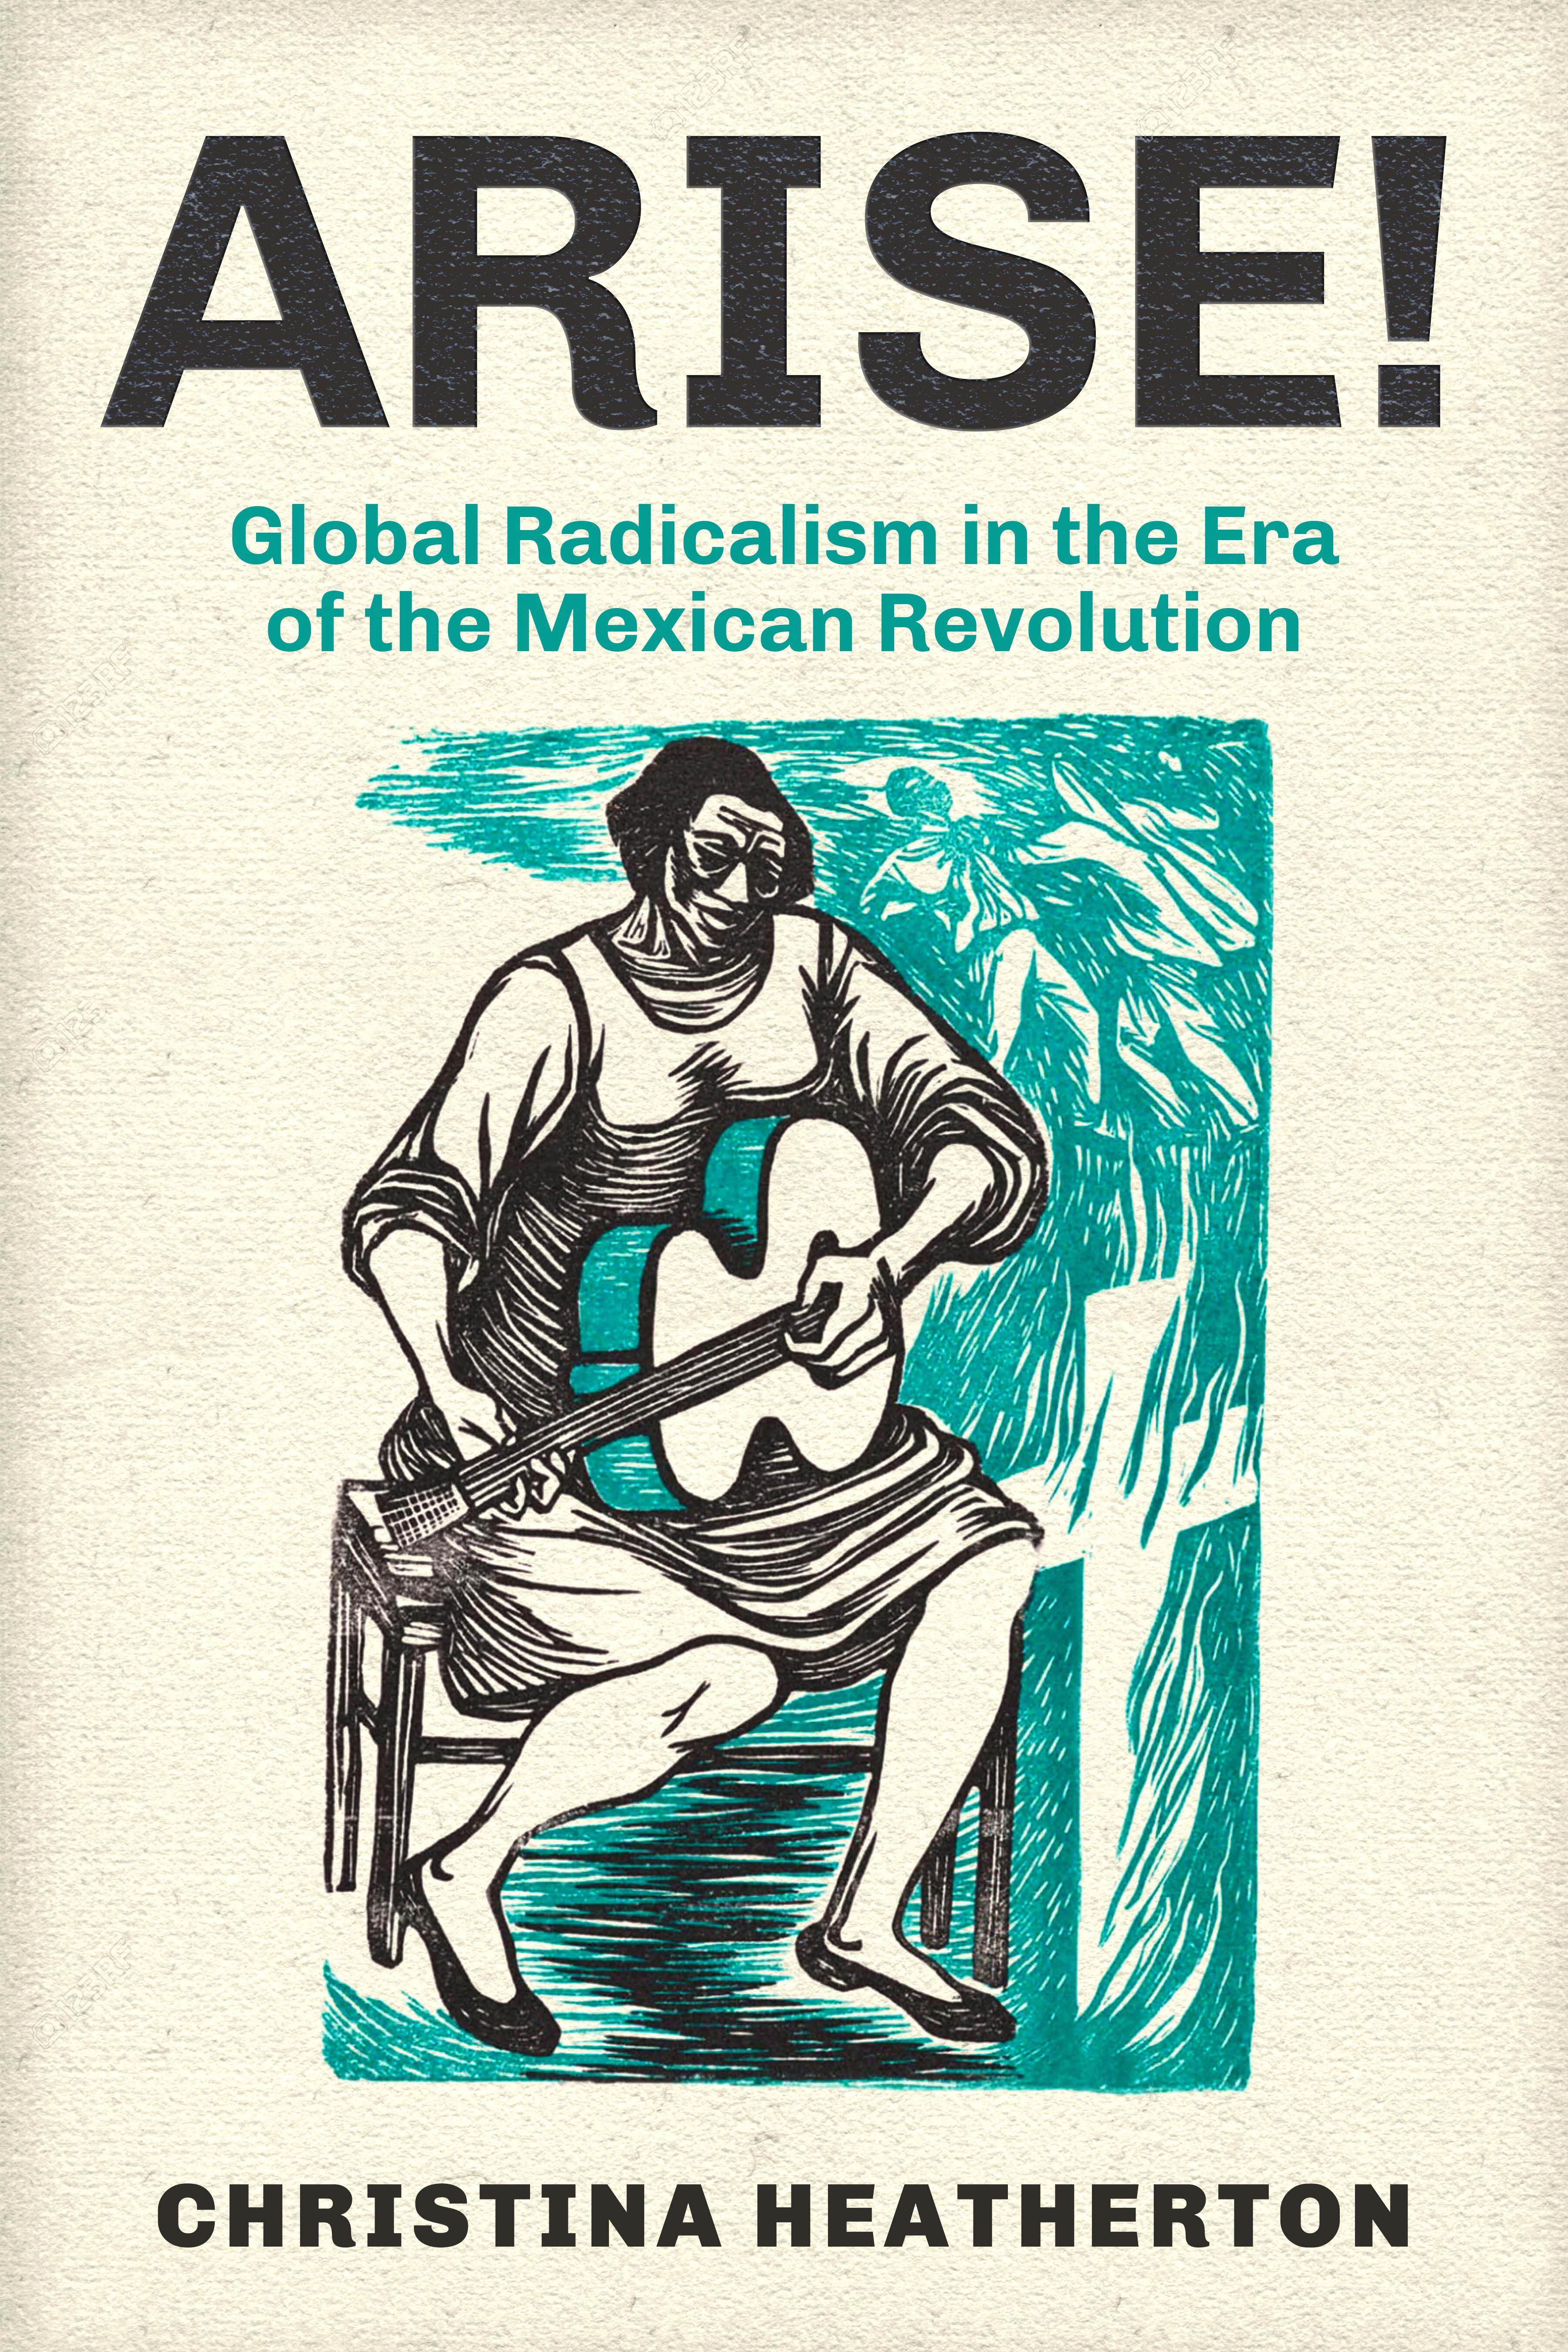 Portada de ‘Arise! Global Radicalism in the Era of the Mexican Revolution’.